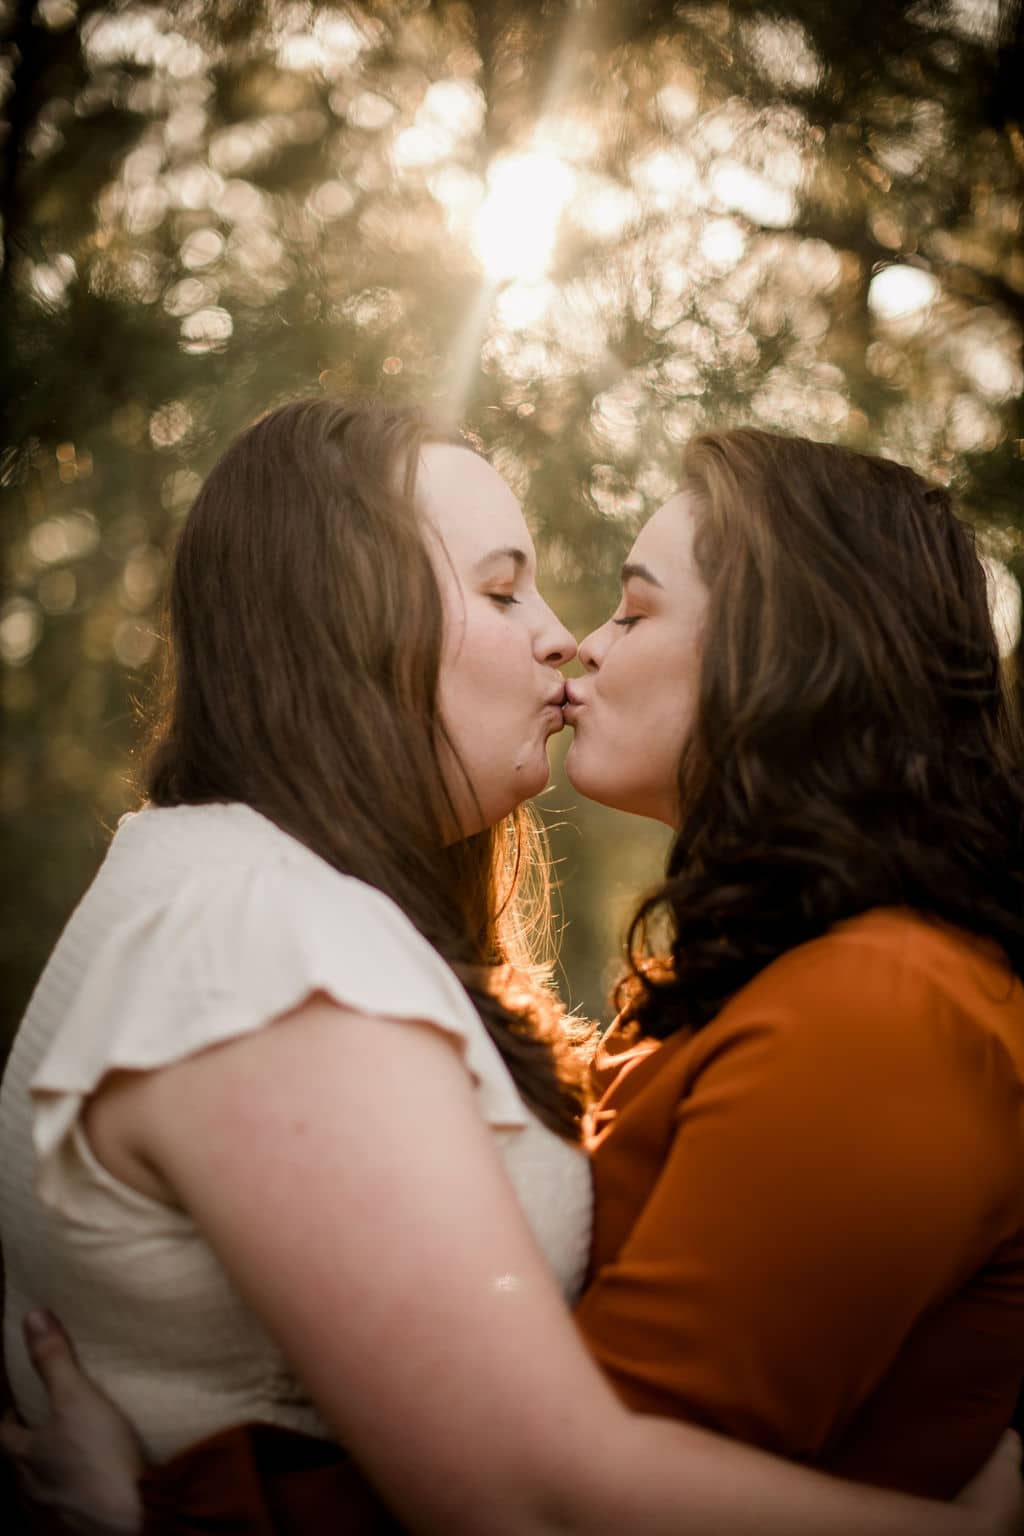 the future brides are embracing each other and kissing in their engagement photo outfits